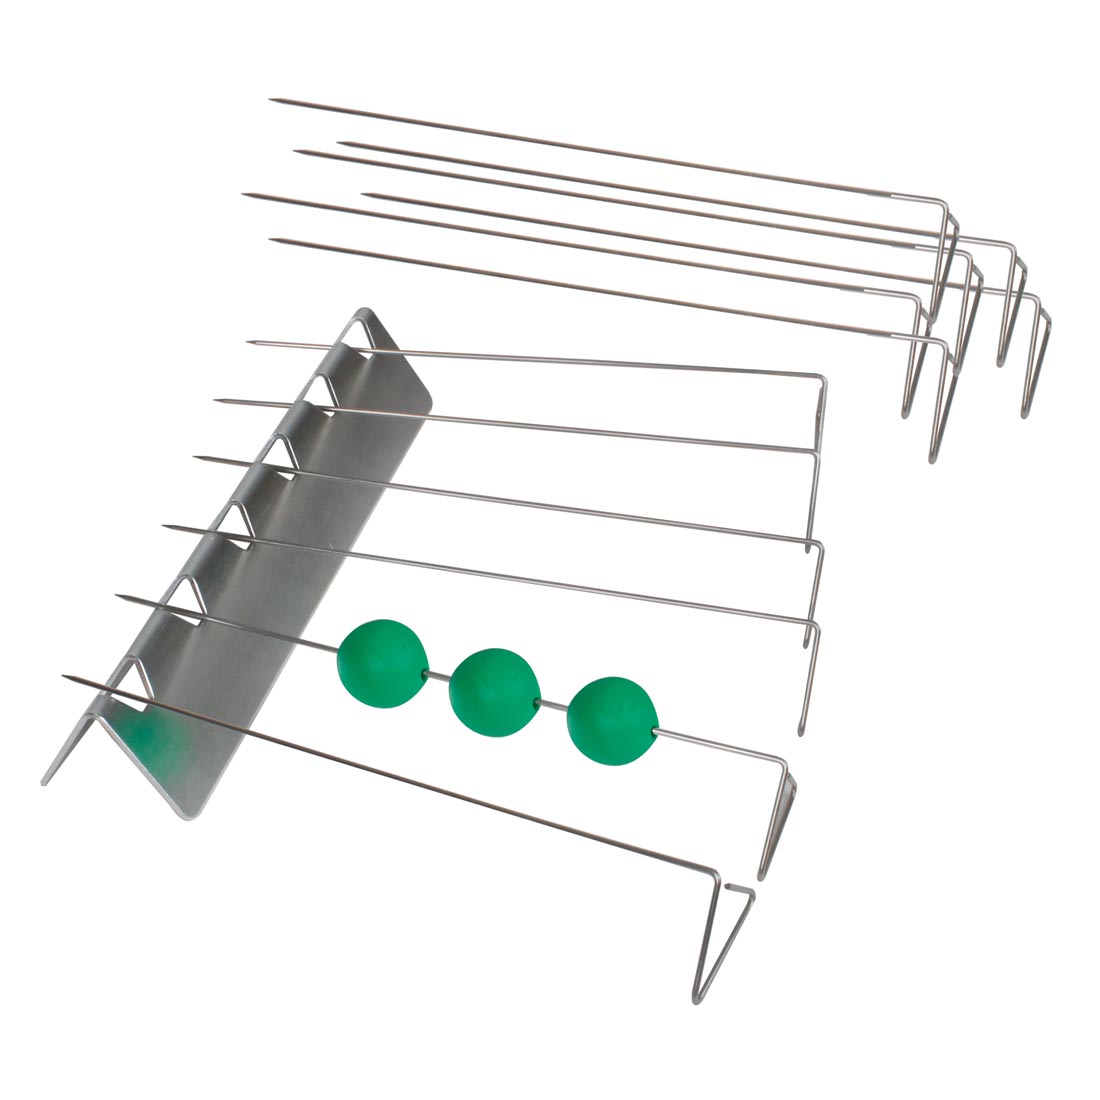 Sculpey Bead Baking Rack shown with three green beads